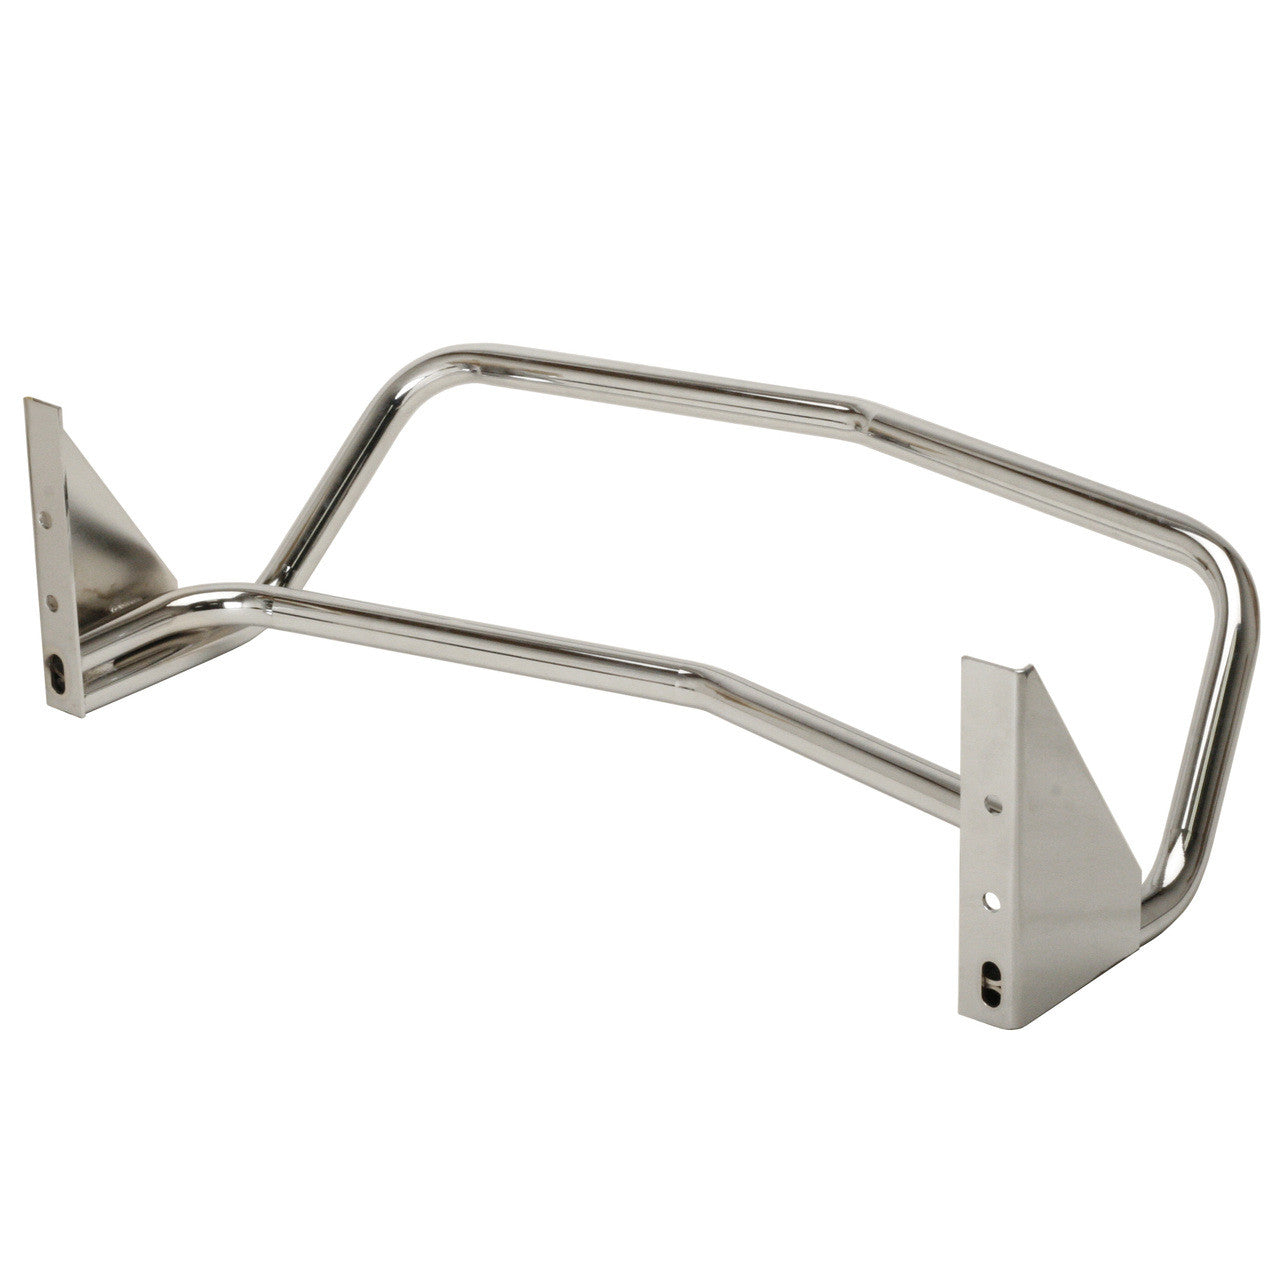 Front Chrome Bumper - Manx Dune Buggy With King Pin Front End